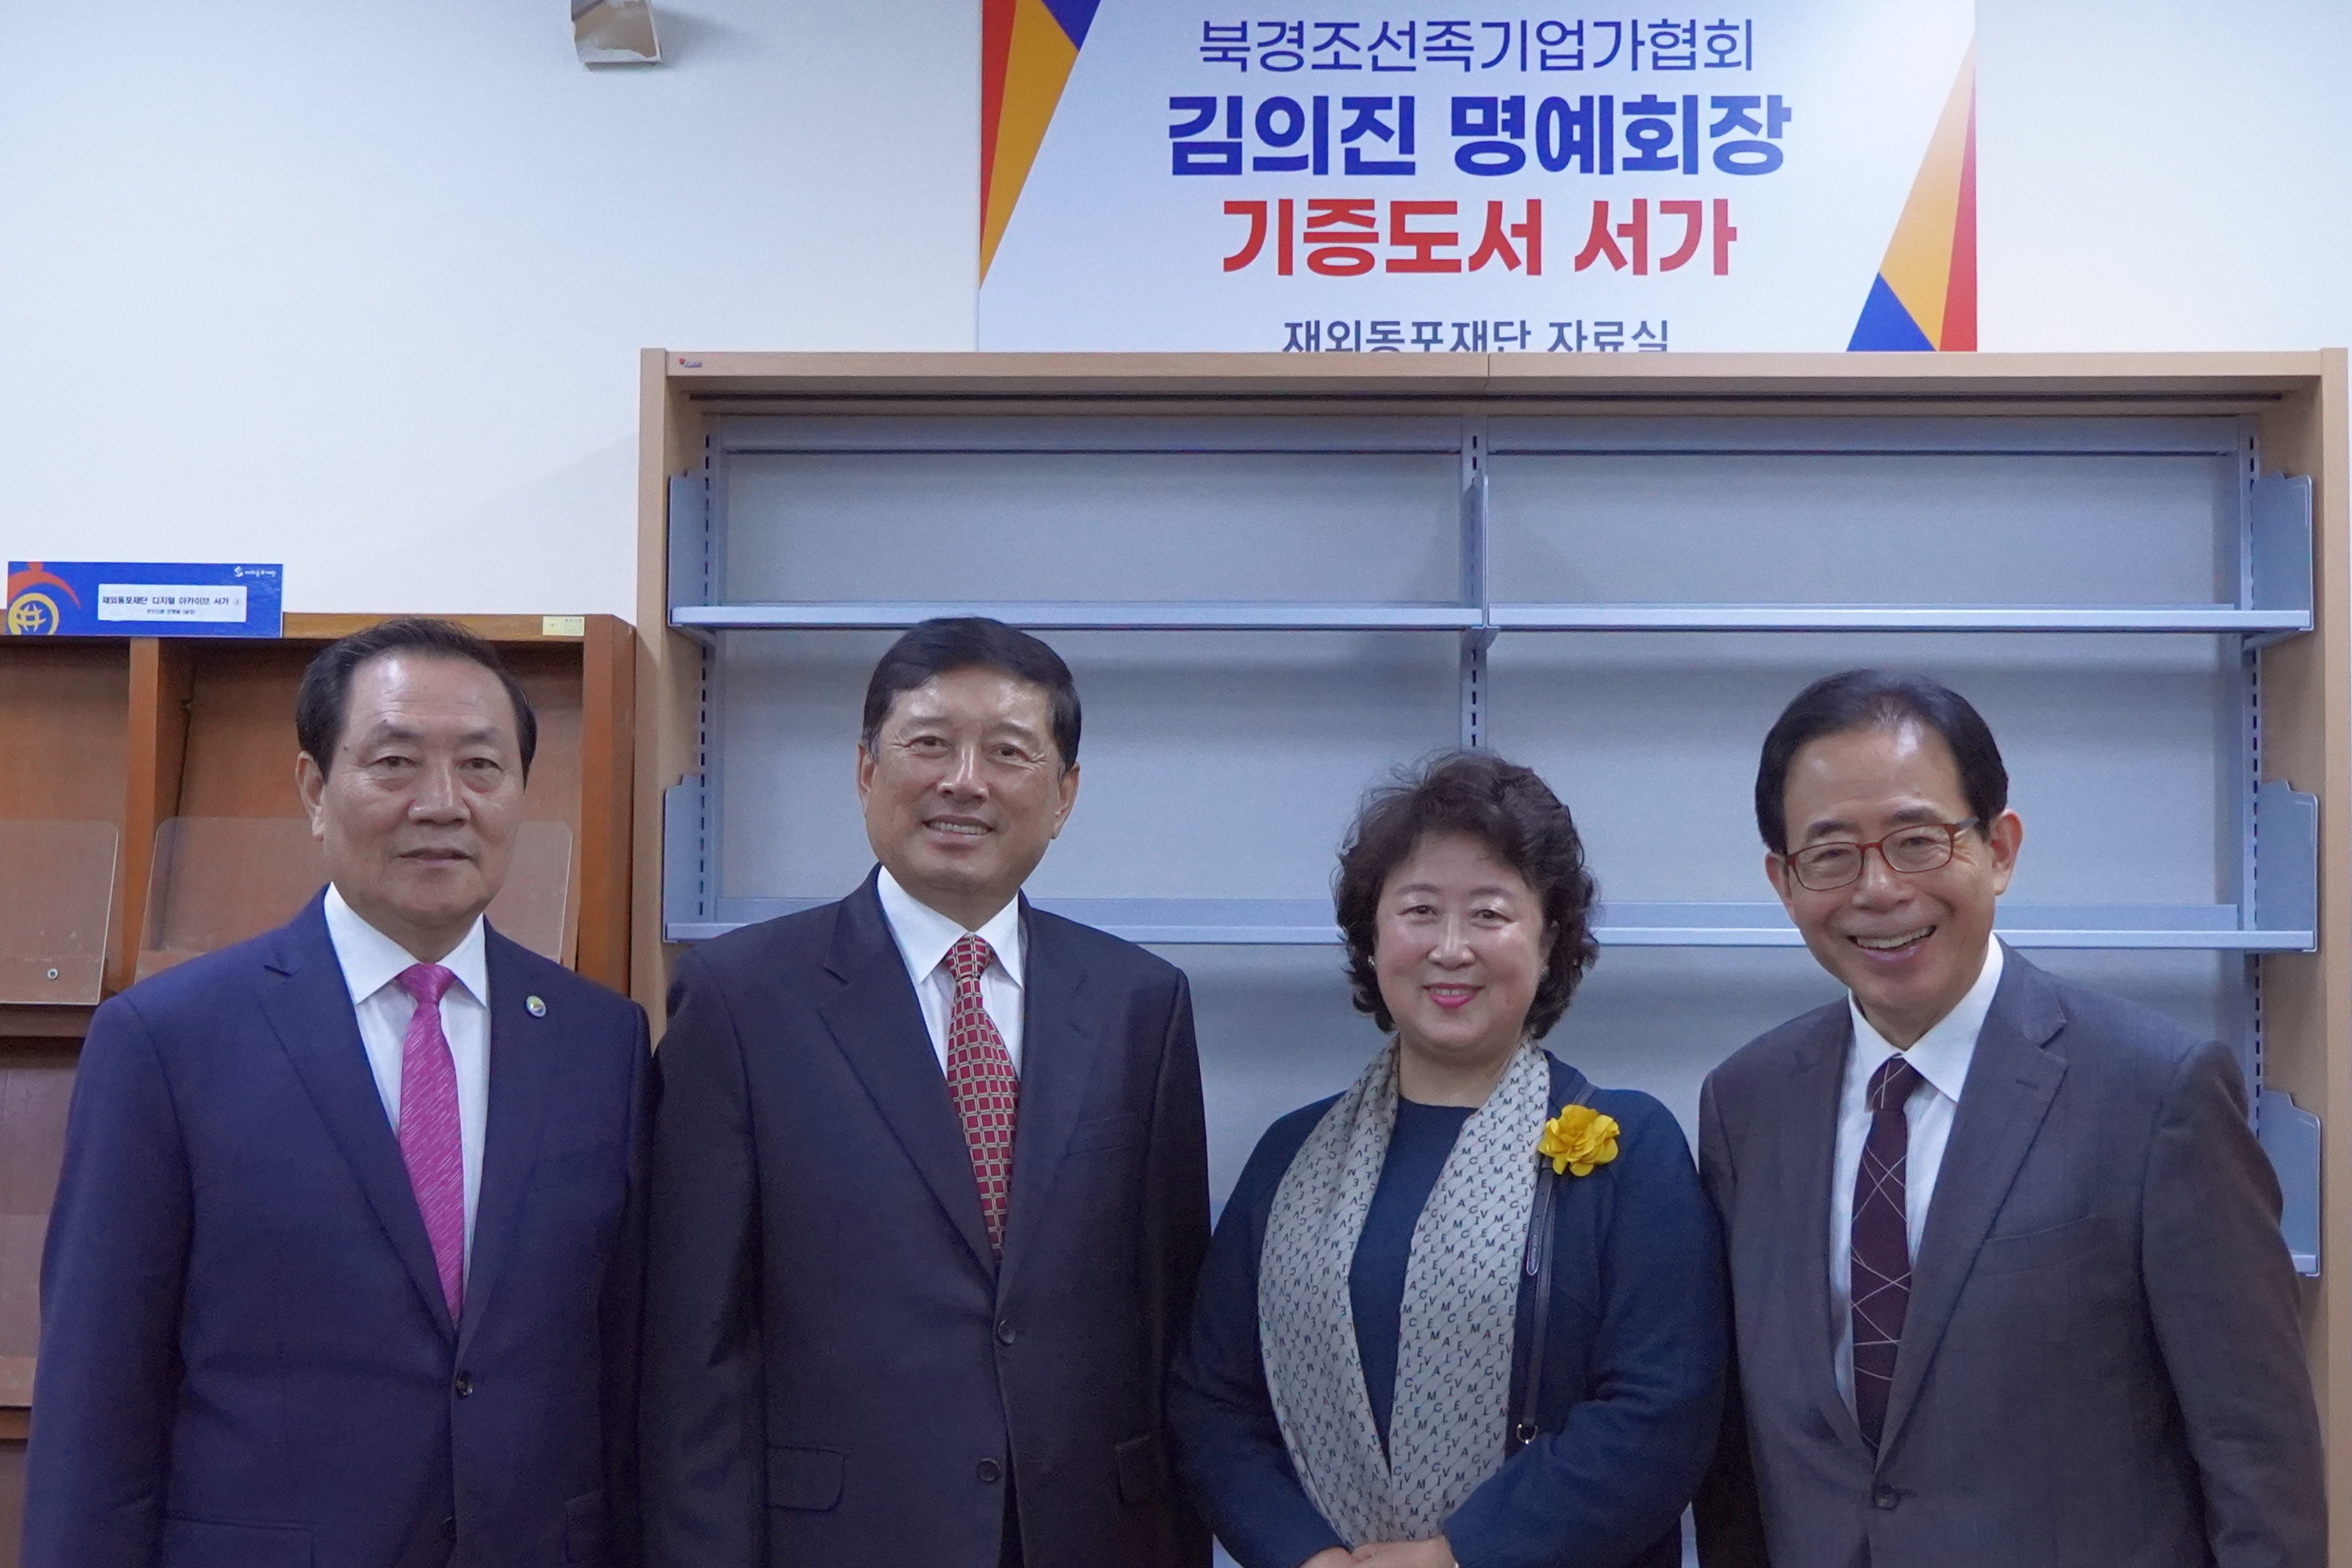 Participants taking a photograph in front of the bookshelf where the donated books will be placed (from left, President Kwon Soon-gi, Honorary President Kim Ui-jin, Honorary President Lee Ran, Chairman Kim Sung-kon)